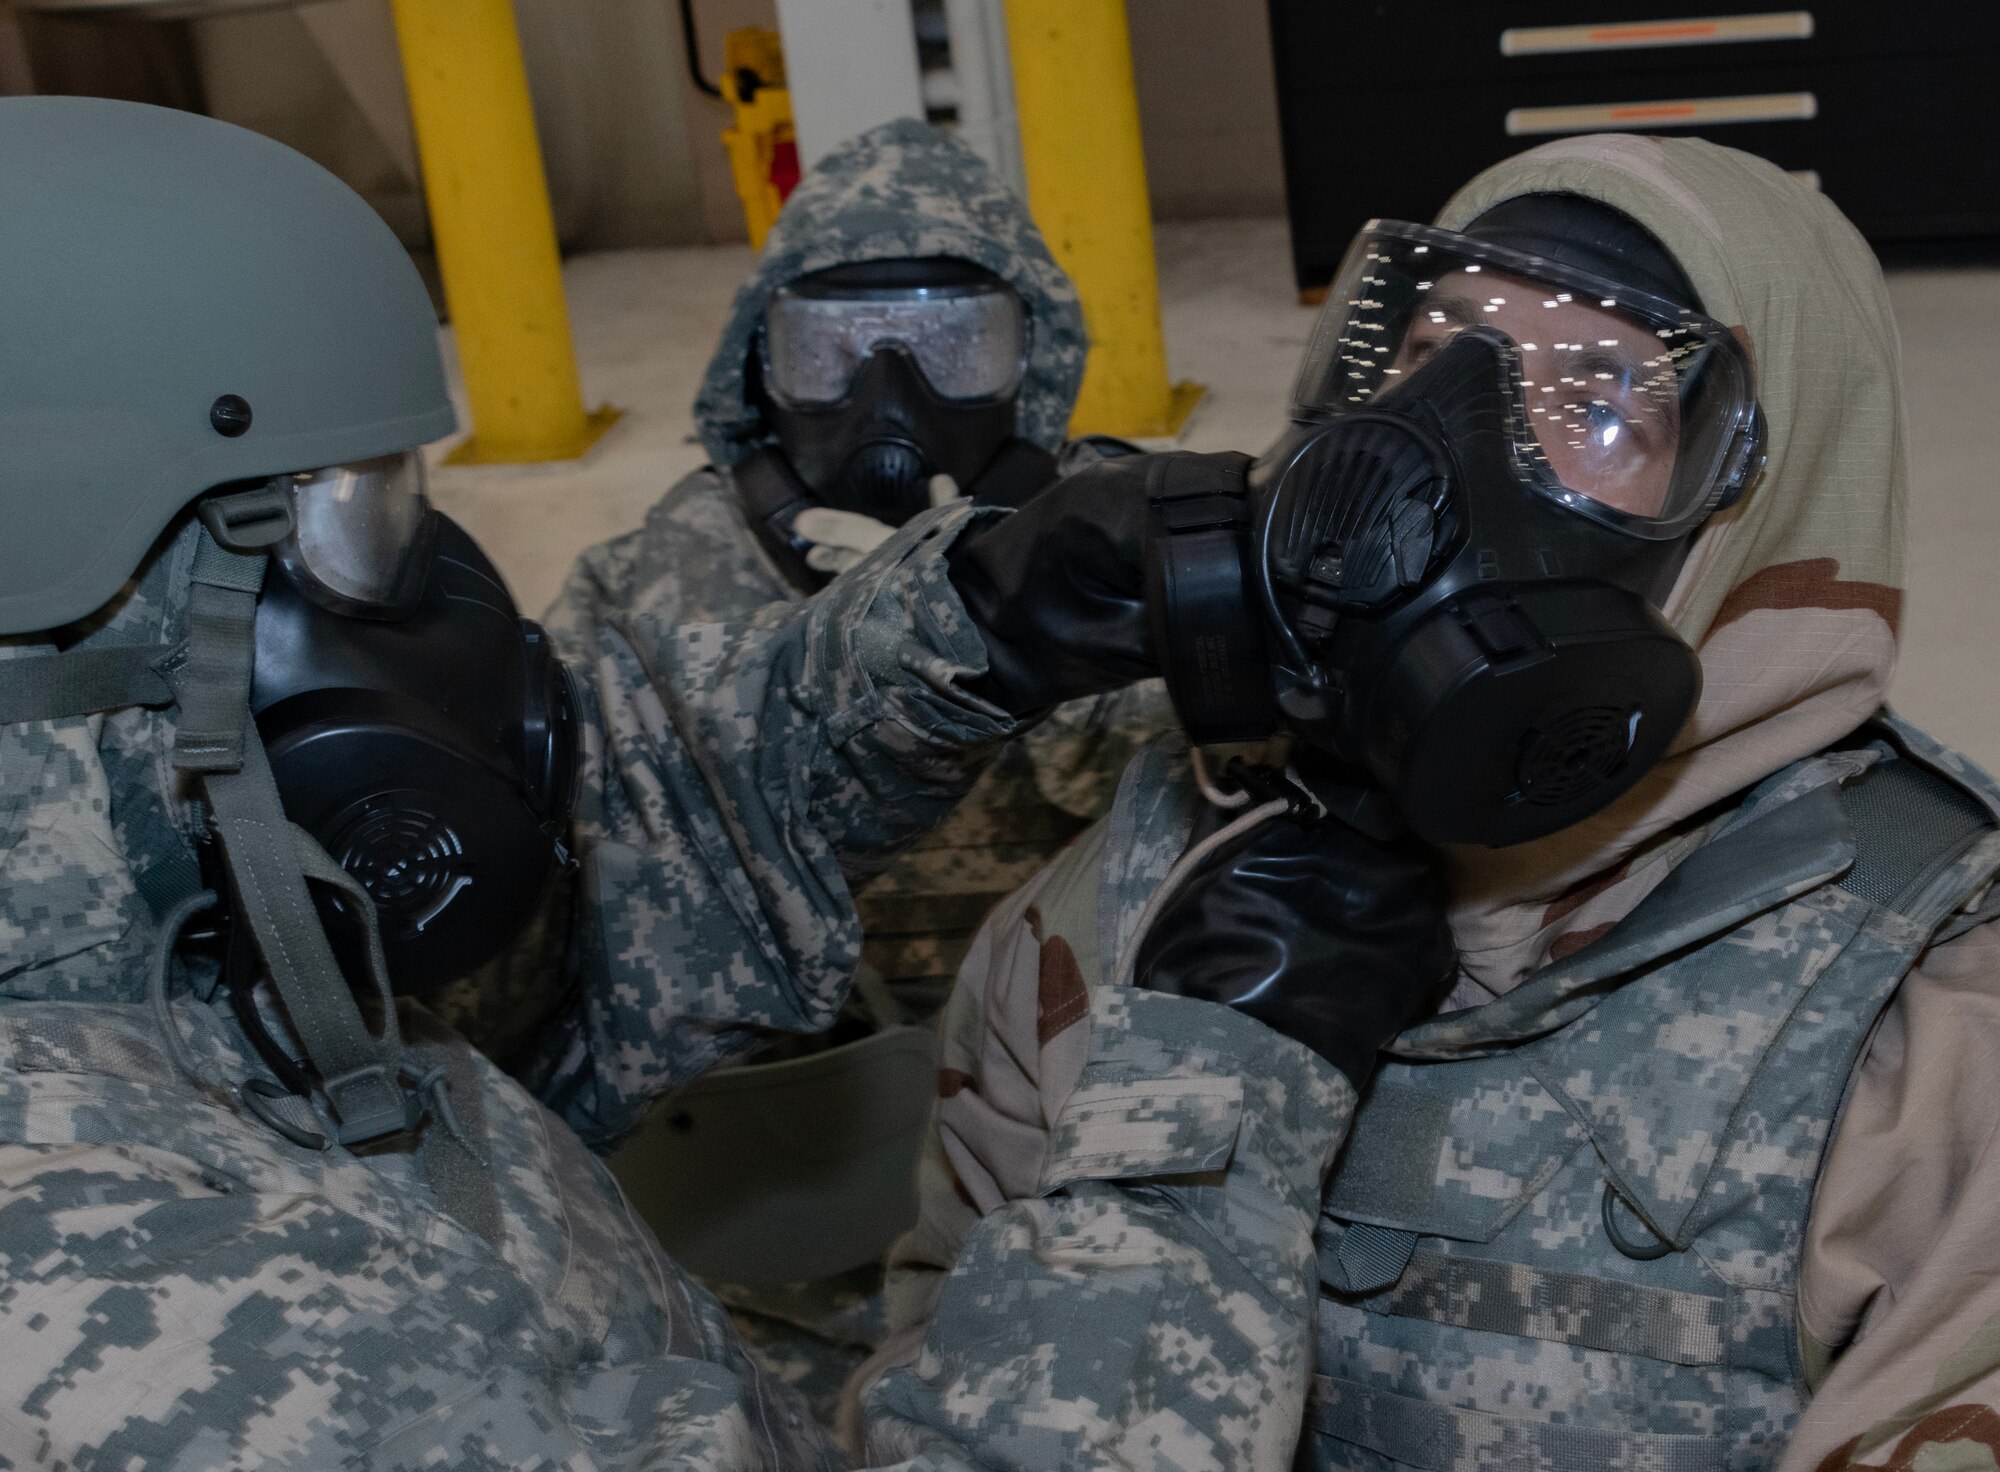 Airman checks another Airman's gas mask.